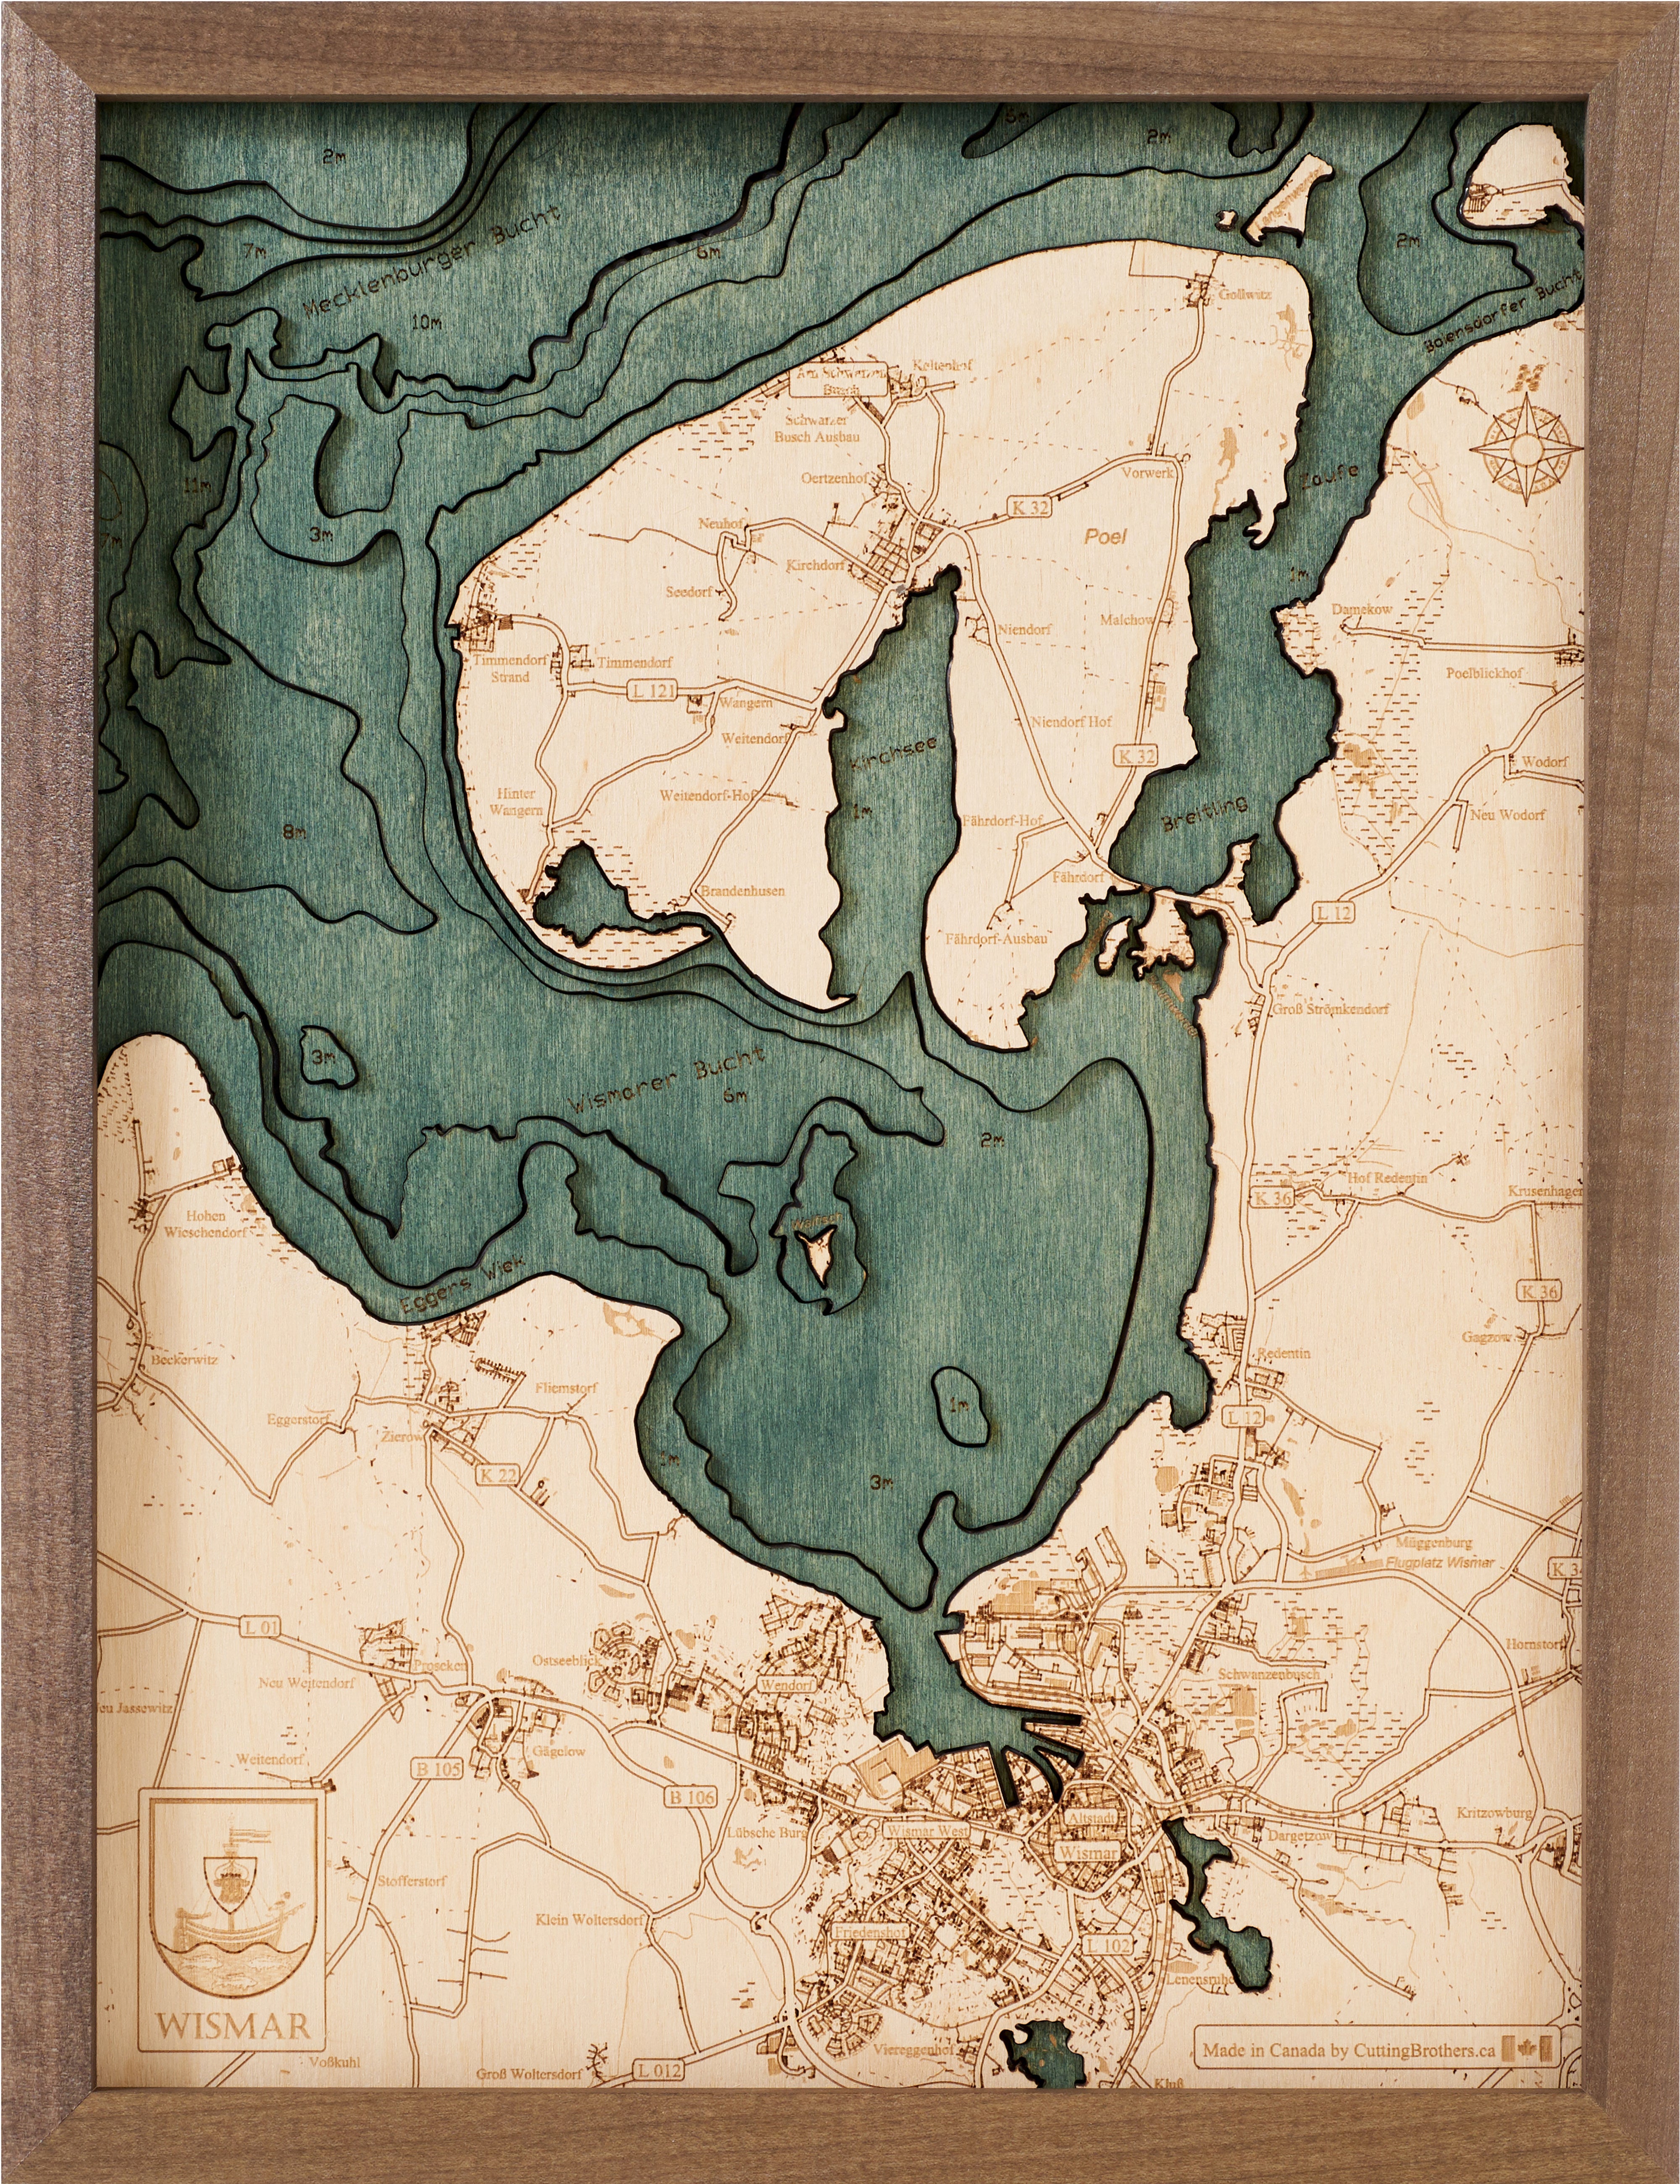 WISMAR and POEL ISLAND 3D wooden wall map - version S